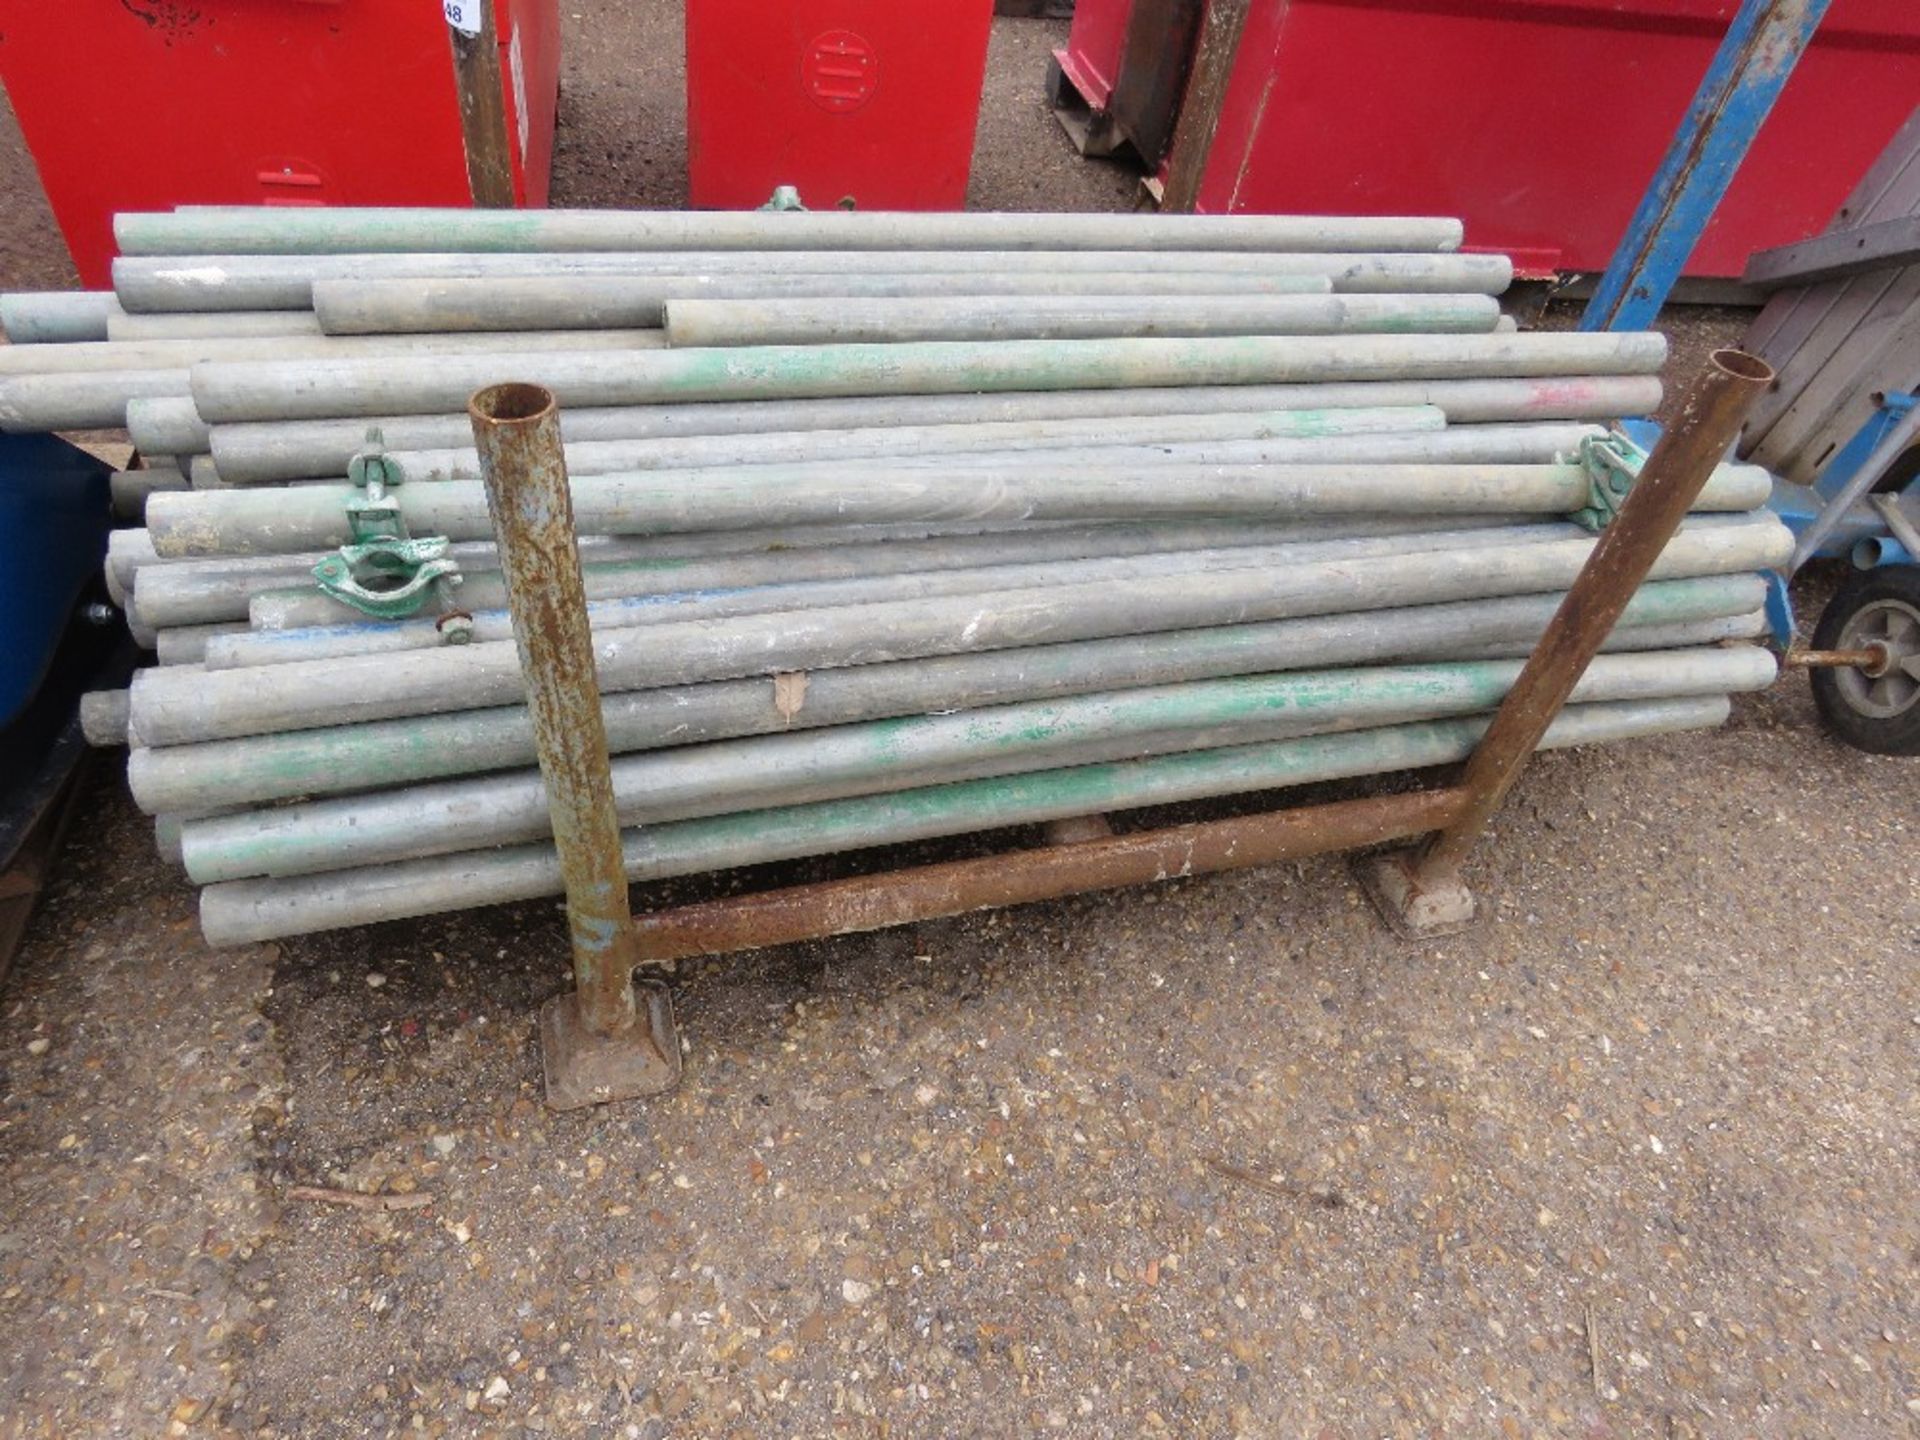 STILLAGE CONTAINING A LARGE QUANTITY OF SHORT LENGTH SCAFFOLD TUBES 3-5FT LENGTH APPROX. - Image 2 of 3